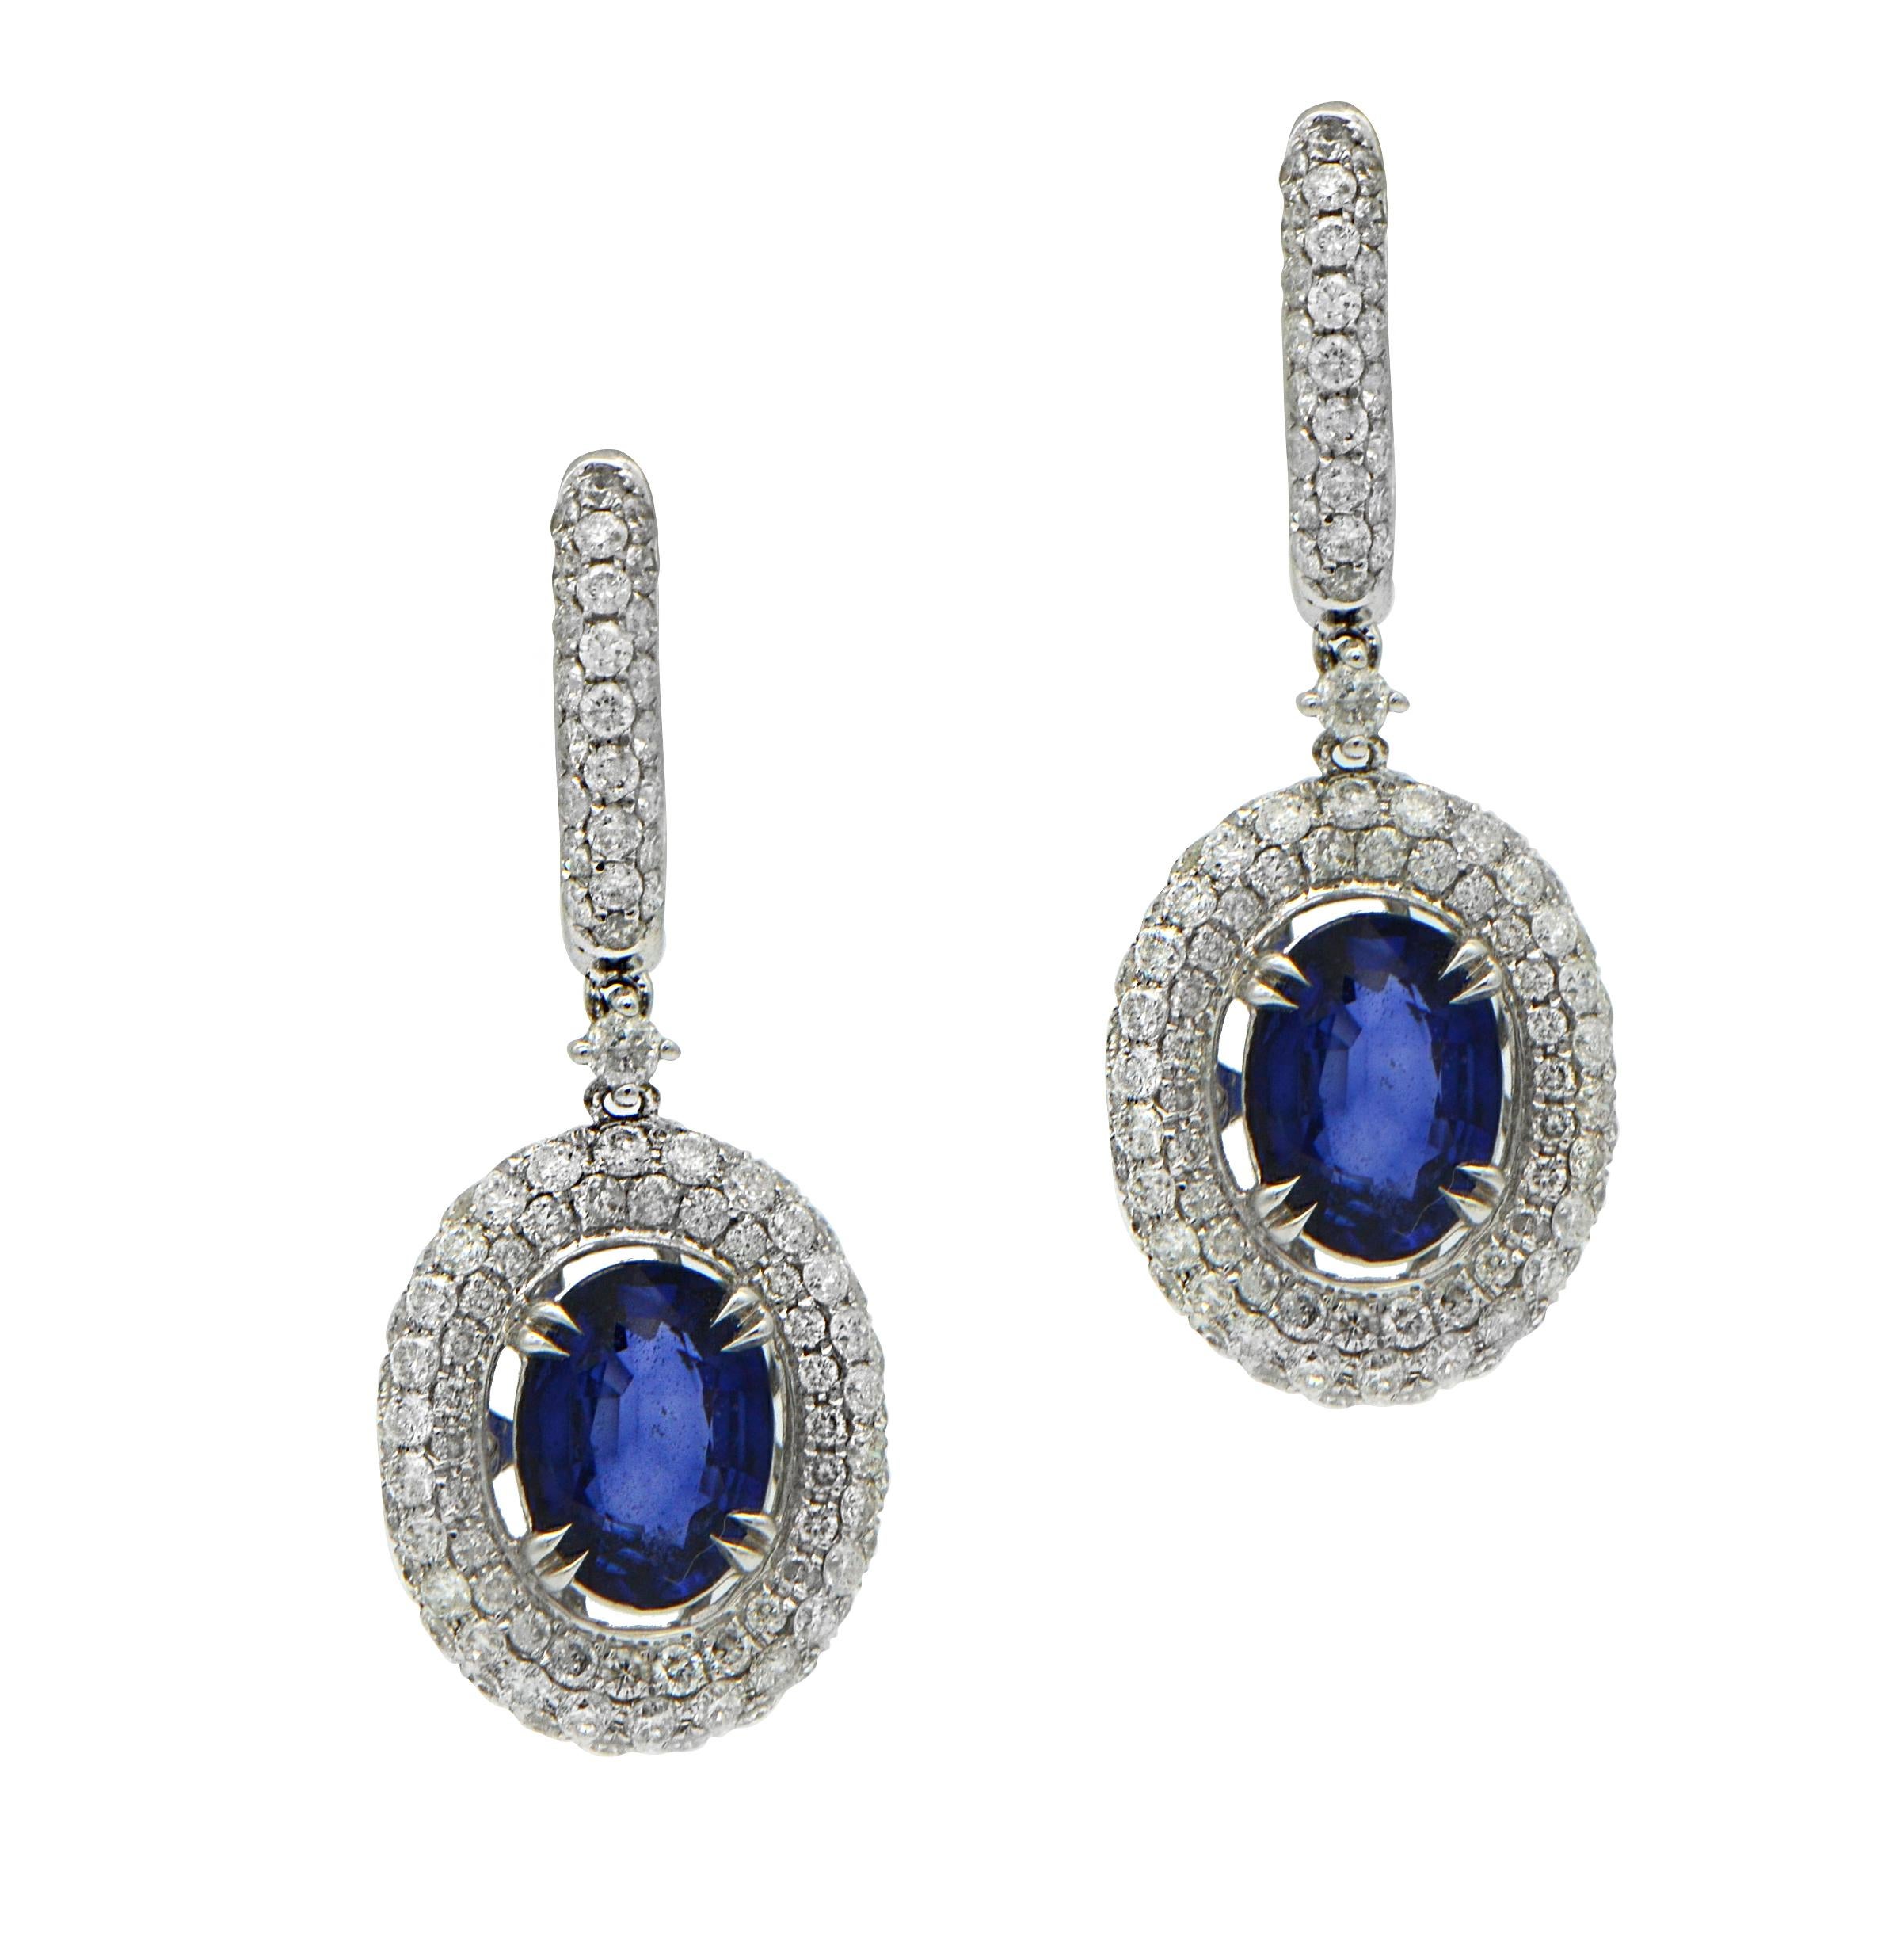 5.01 Total Carat Fancy Sapphire Earrings with Pave Diamond Halo in 18K White Gold

These glamorous sapphire earrings are perfectly handcrafted from the finest diamonds, sapphire, and white gold. The diamond pave creates a dramatic styling that adds